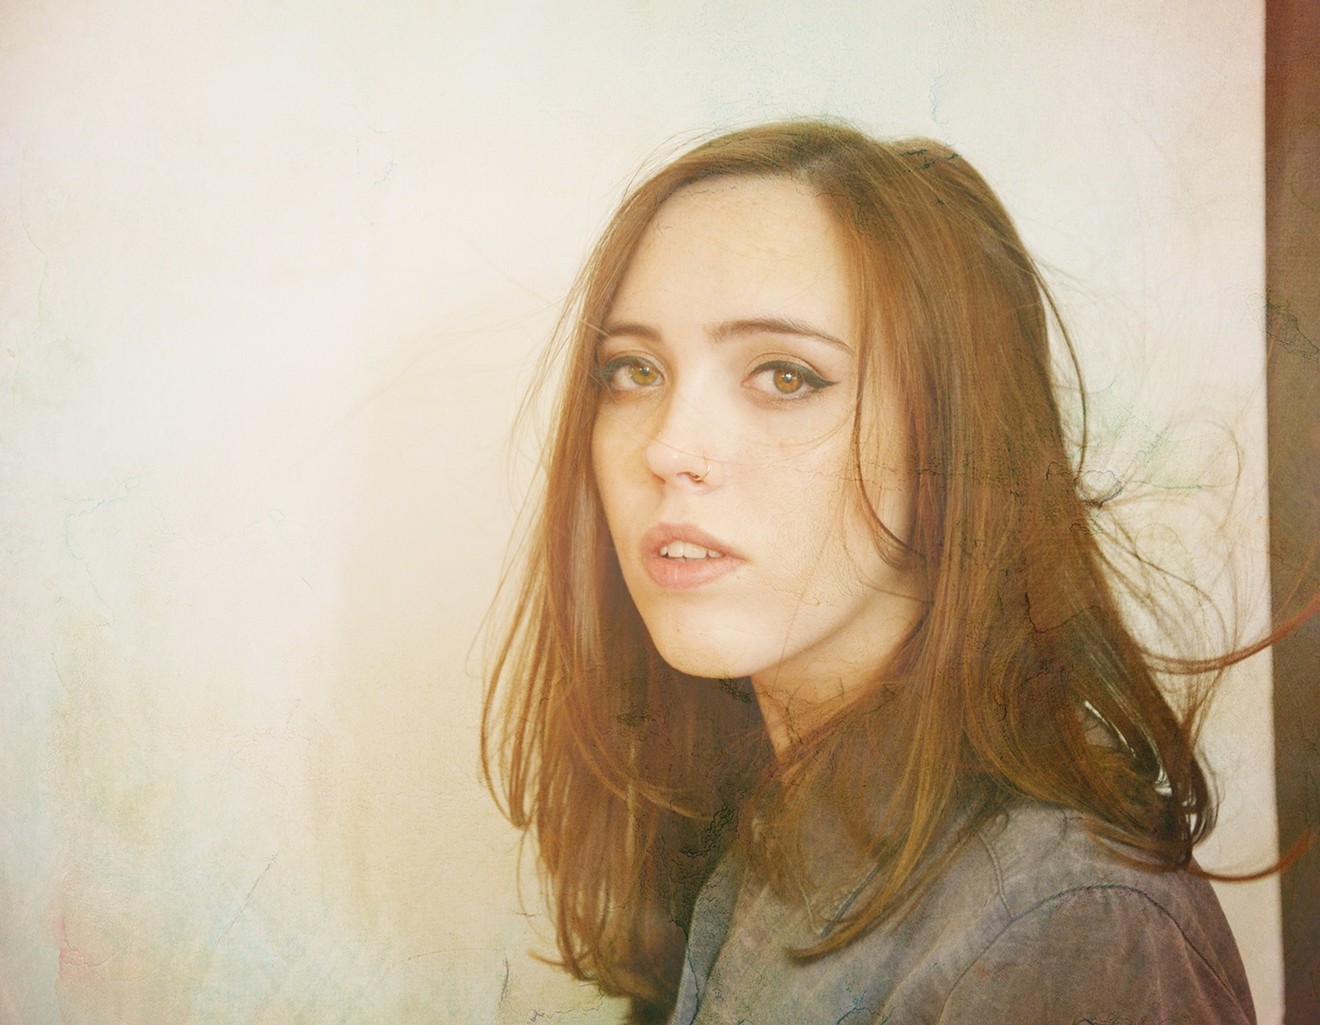 Twenty-one-year-old Sophie Allison makes music as Soccer Mommy.